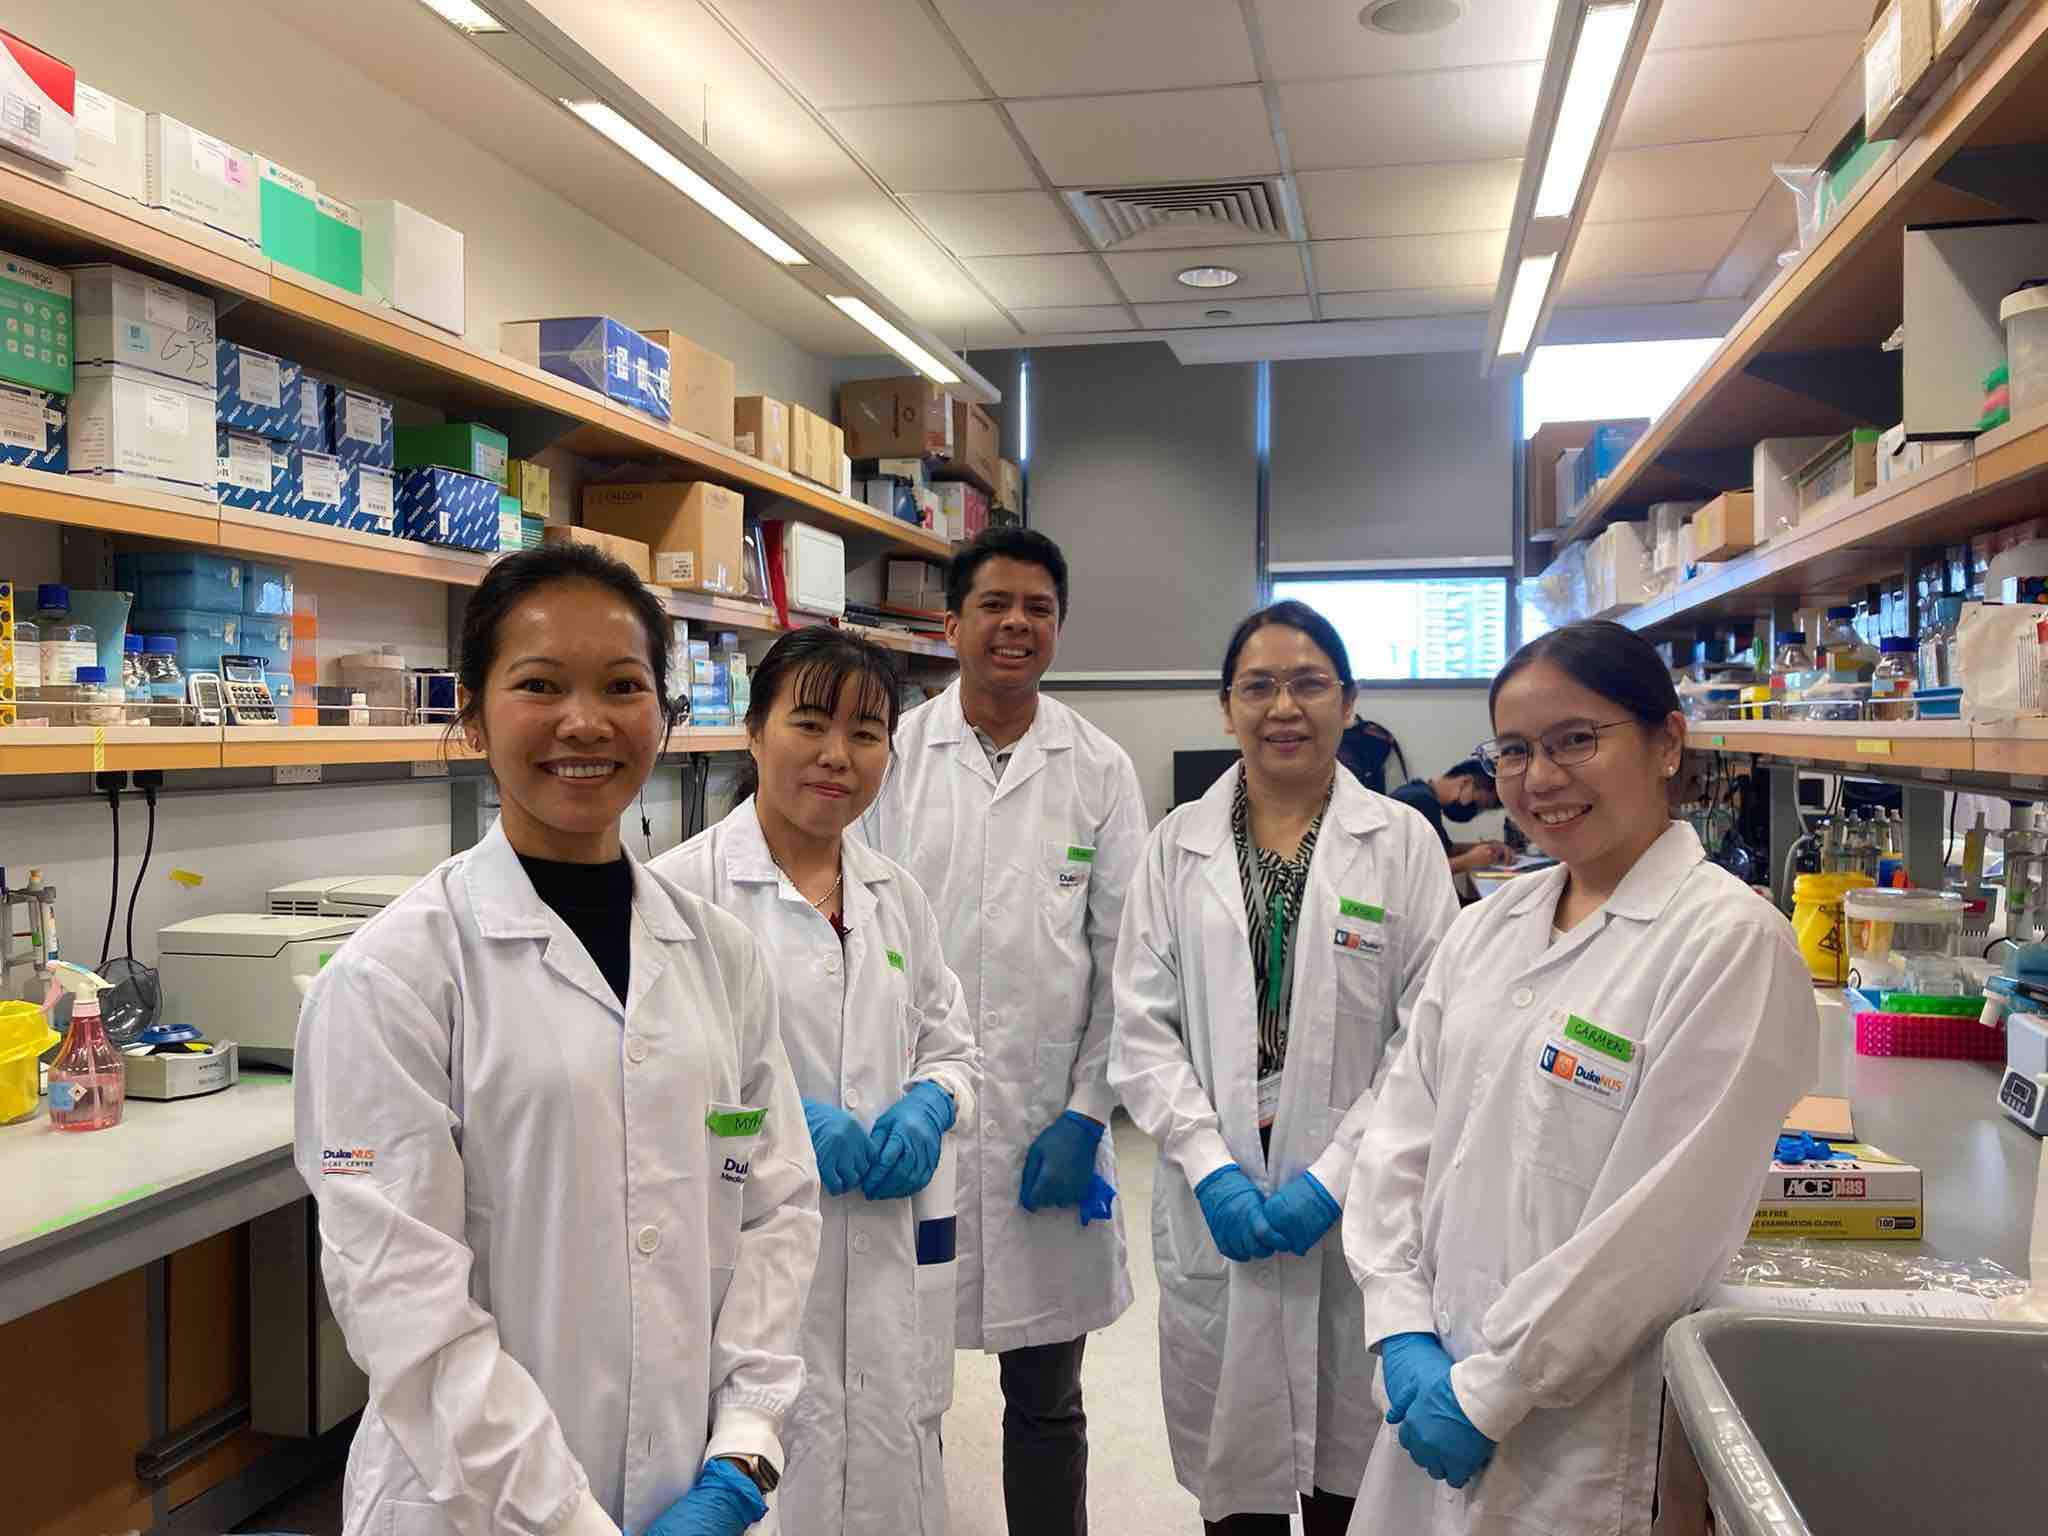 Participants in the Emerging Infectious Diseases laboratory